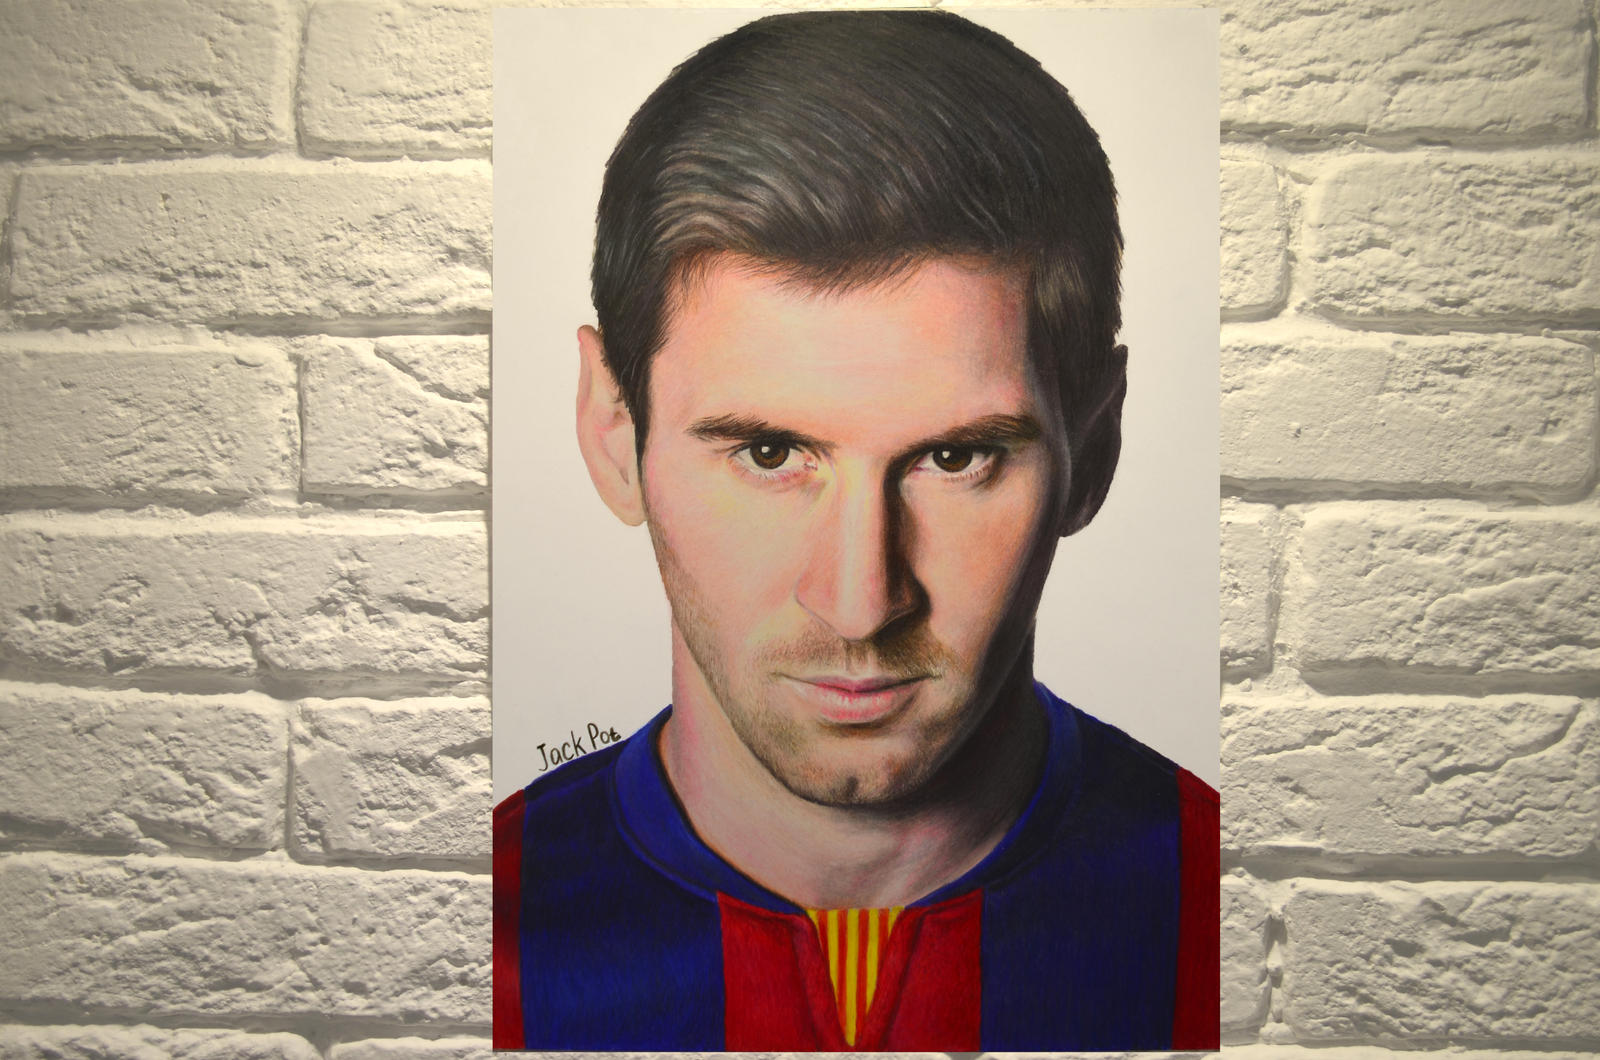 Colored pencil drawing of Lionel Messi by EJackpot on DeviantArt